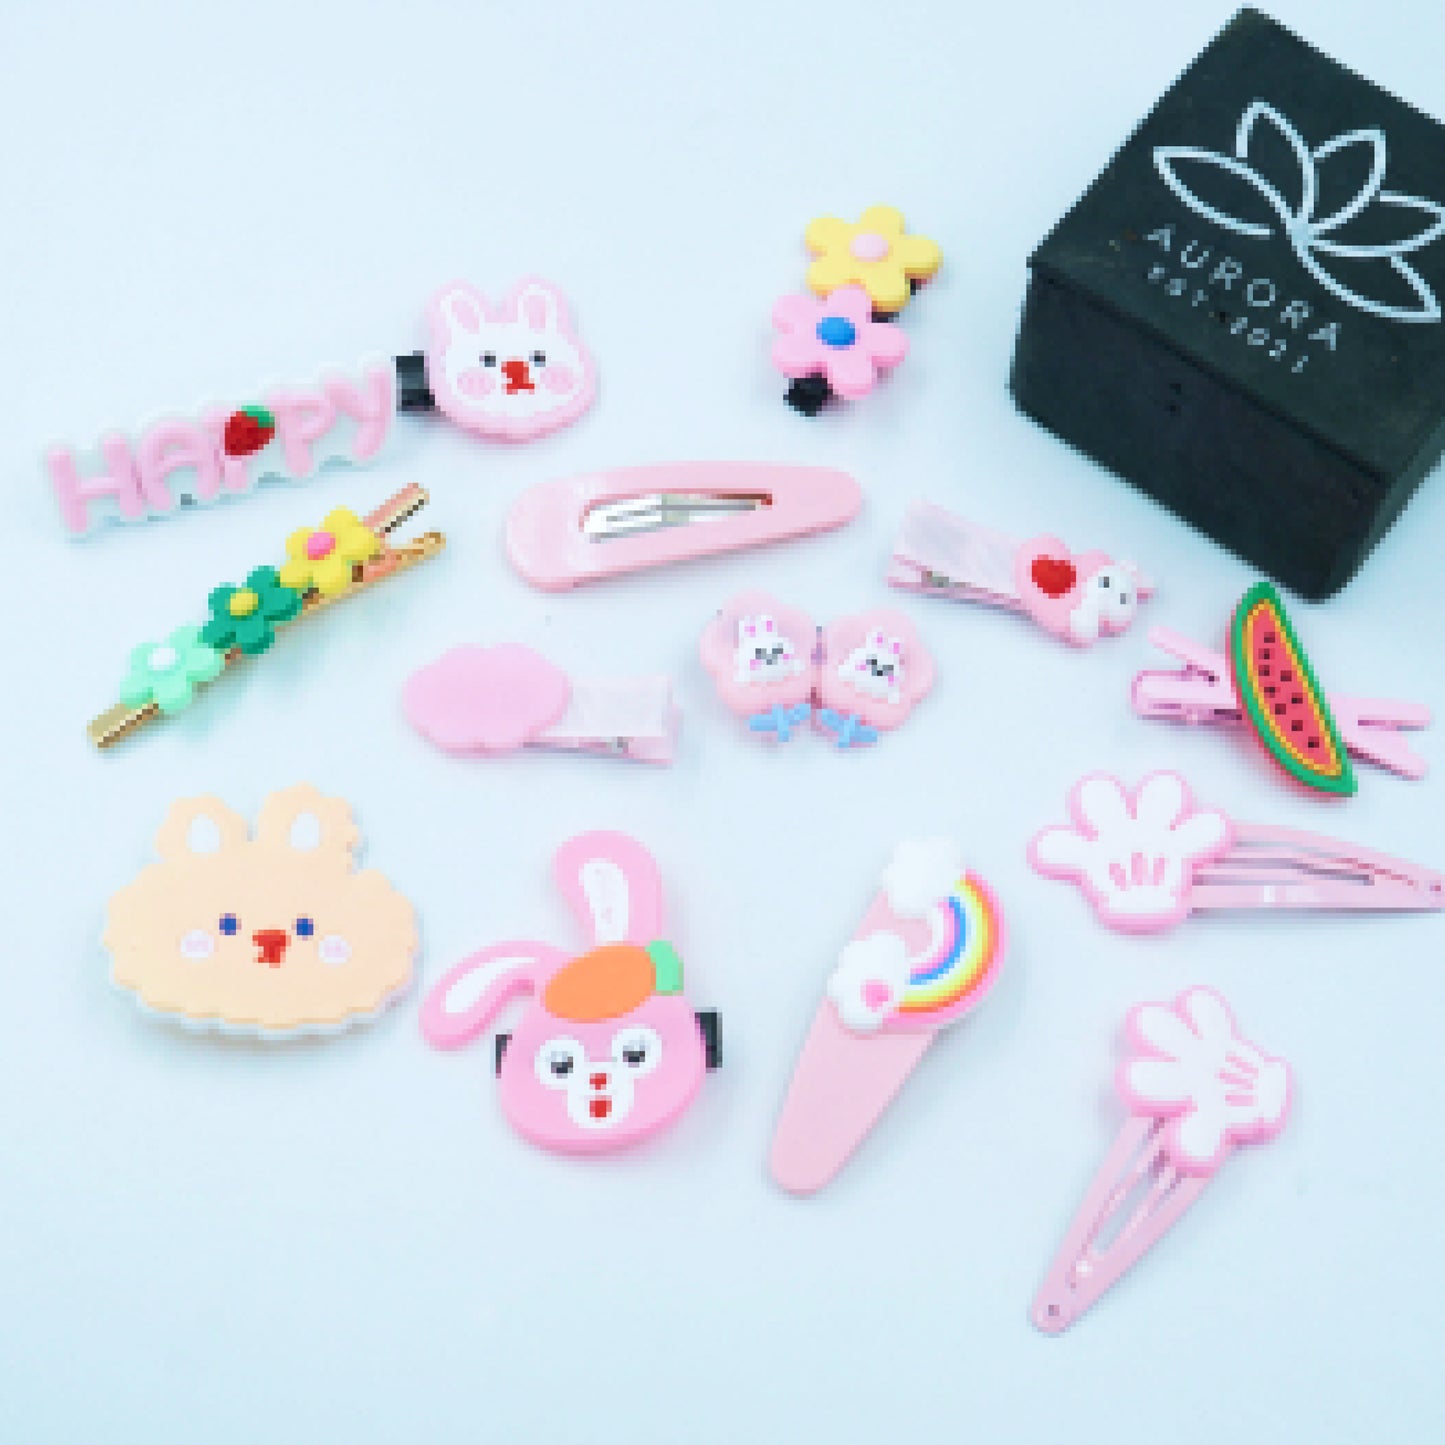 Buy Pink Hair Clips | Kids Collection | Simple Design | 14 pcs in 1 packet | B19